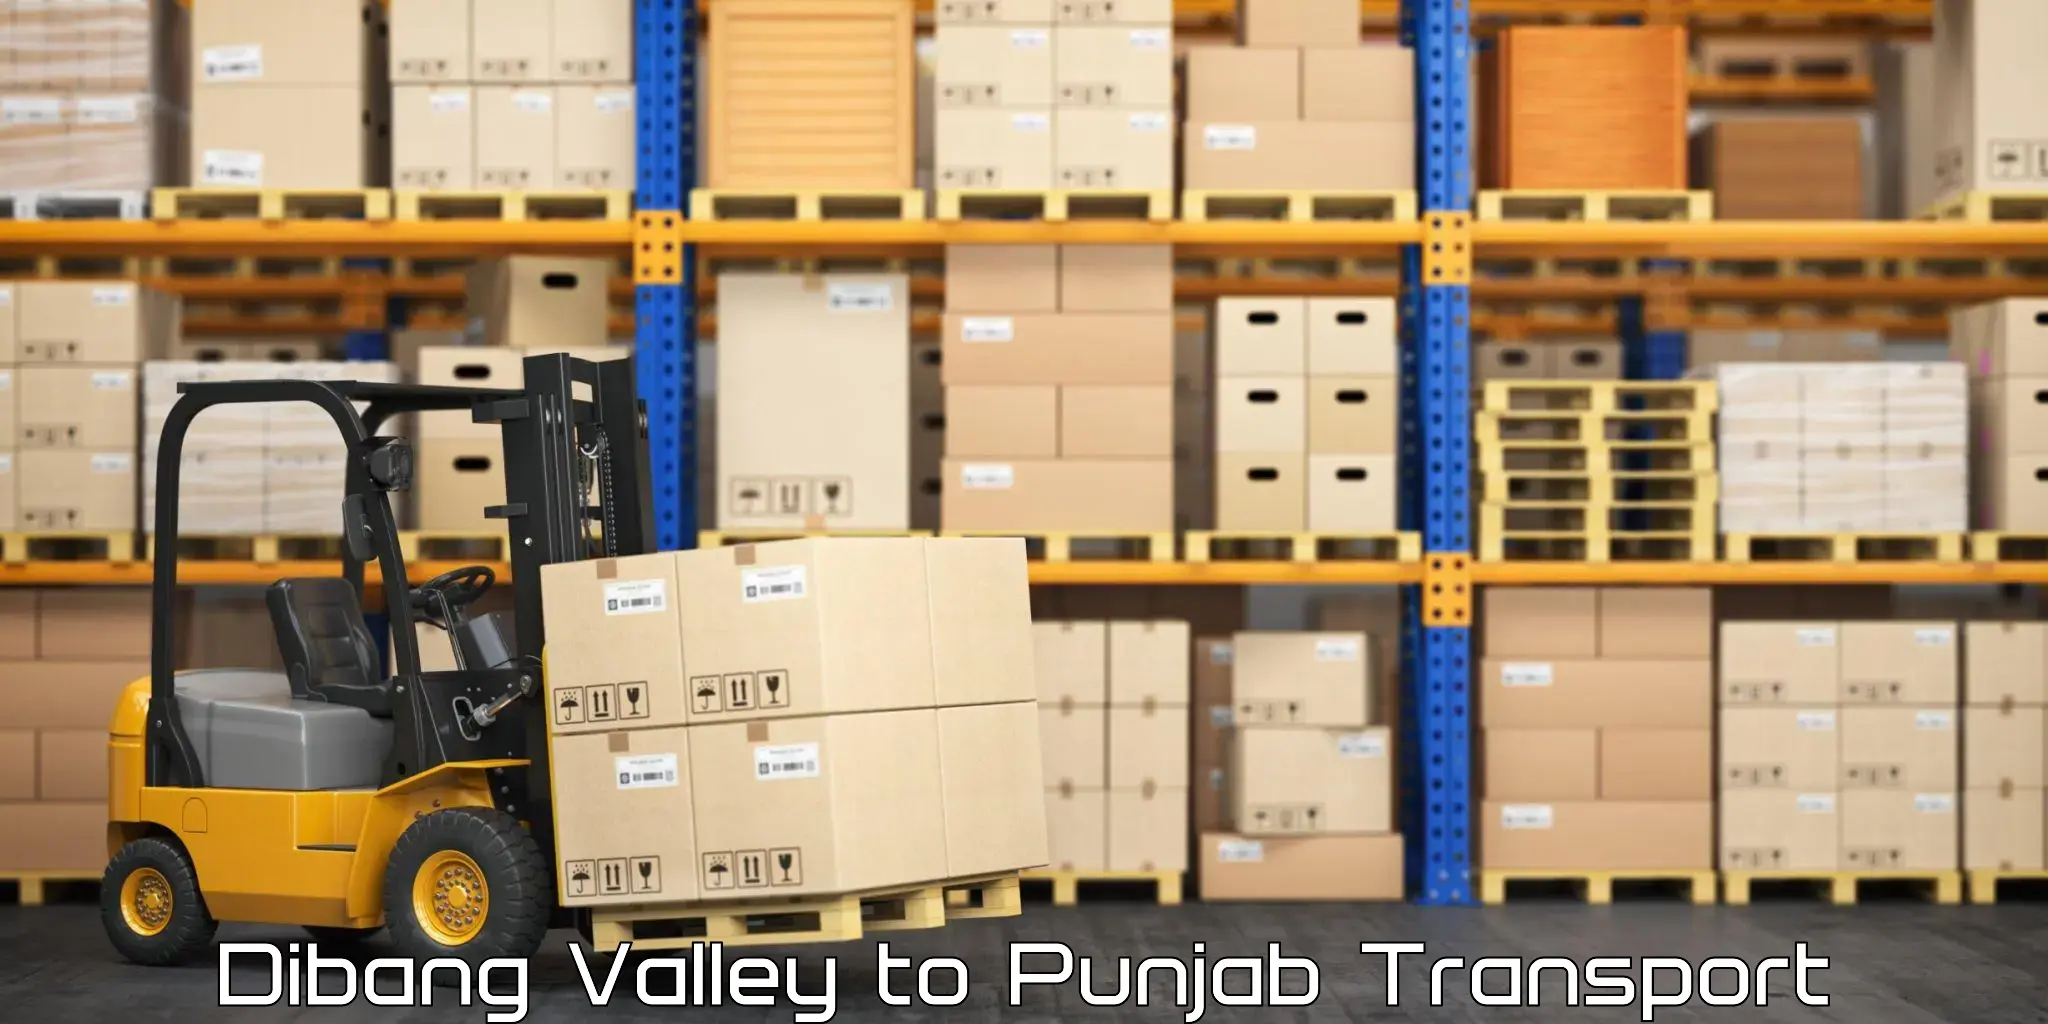 All India transport service Dibang Valley to Punjab